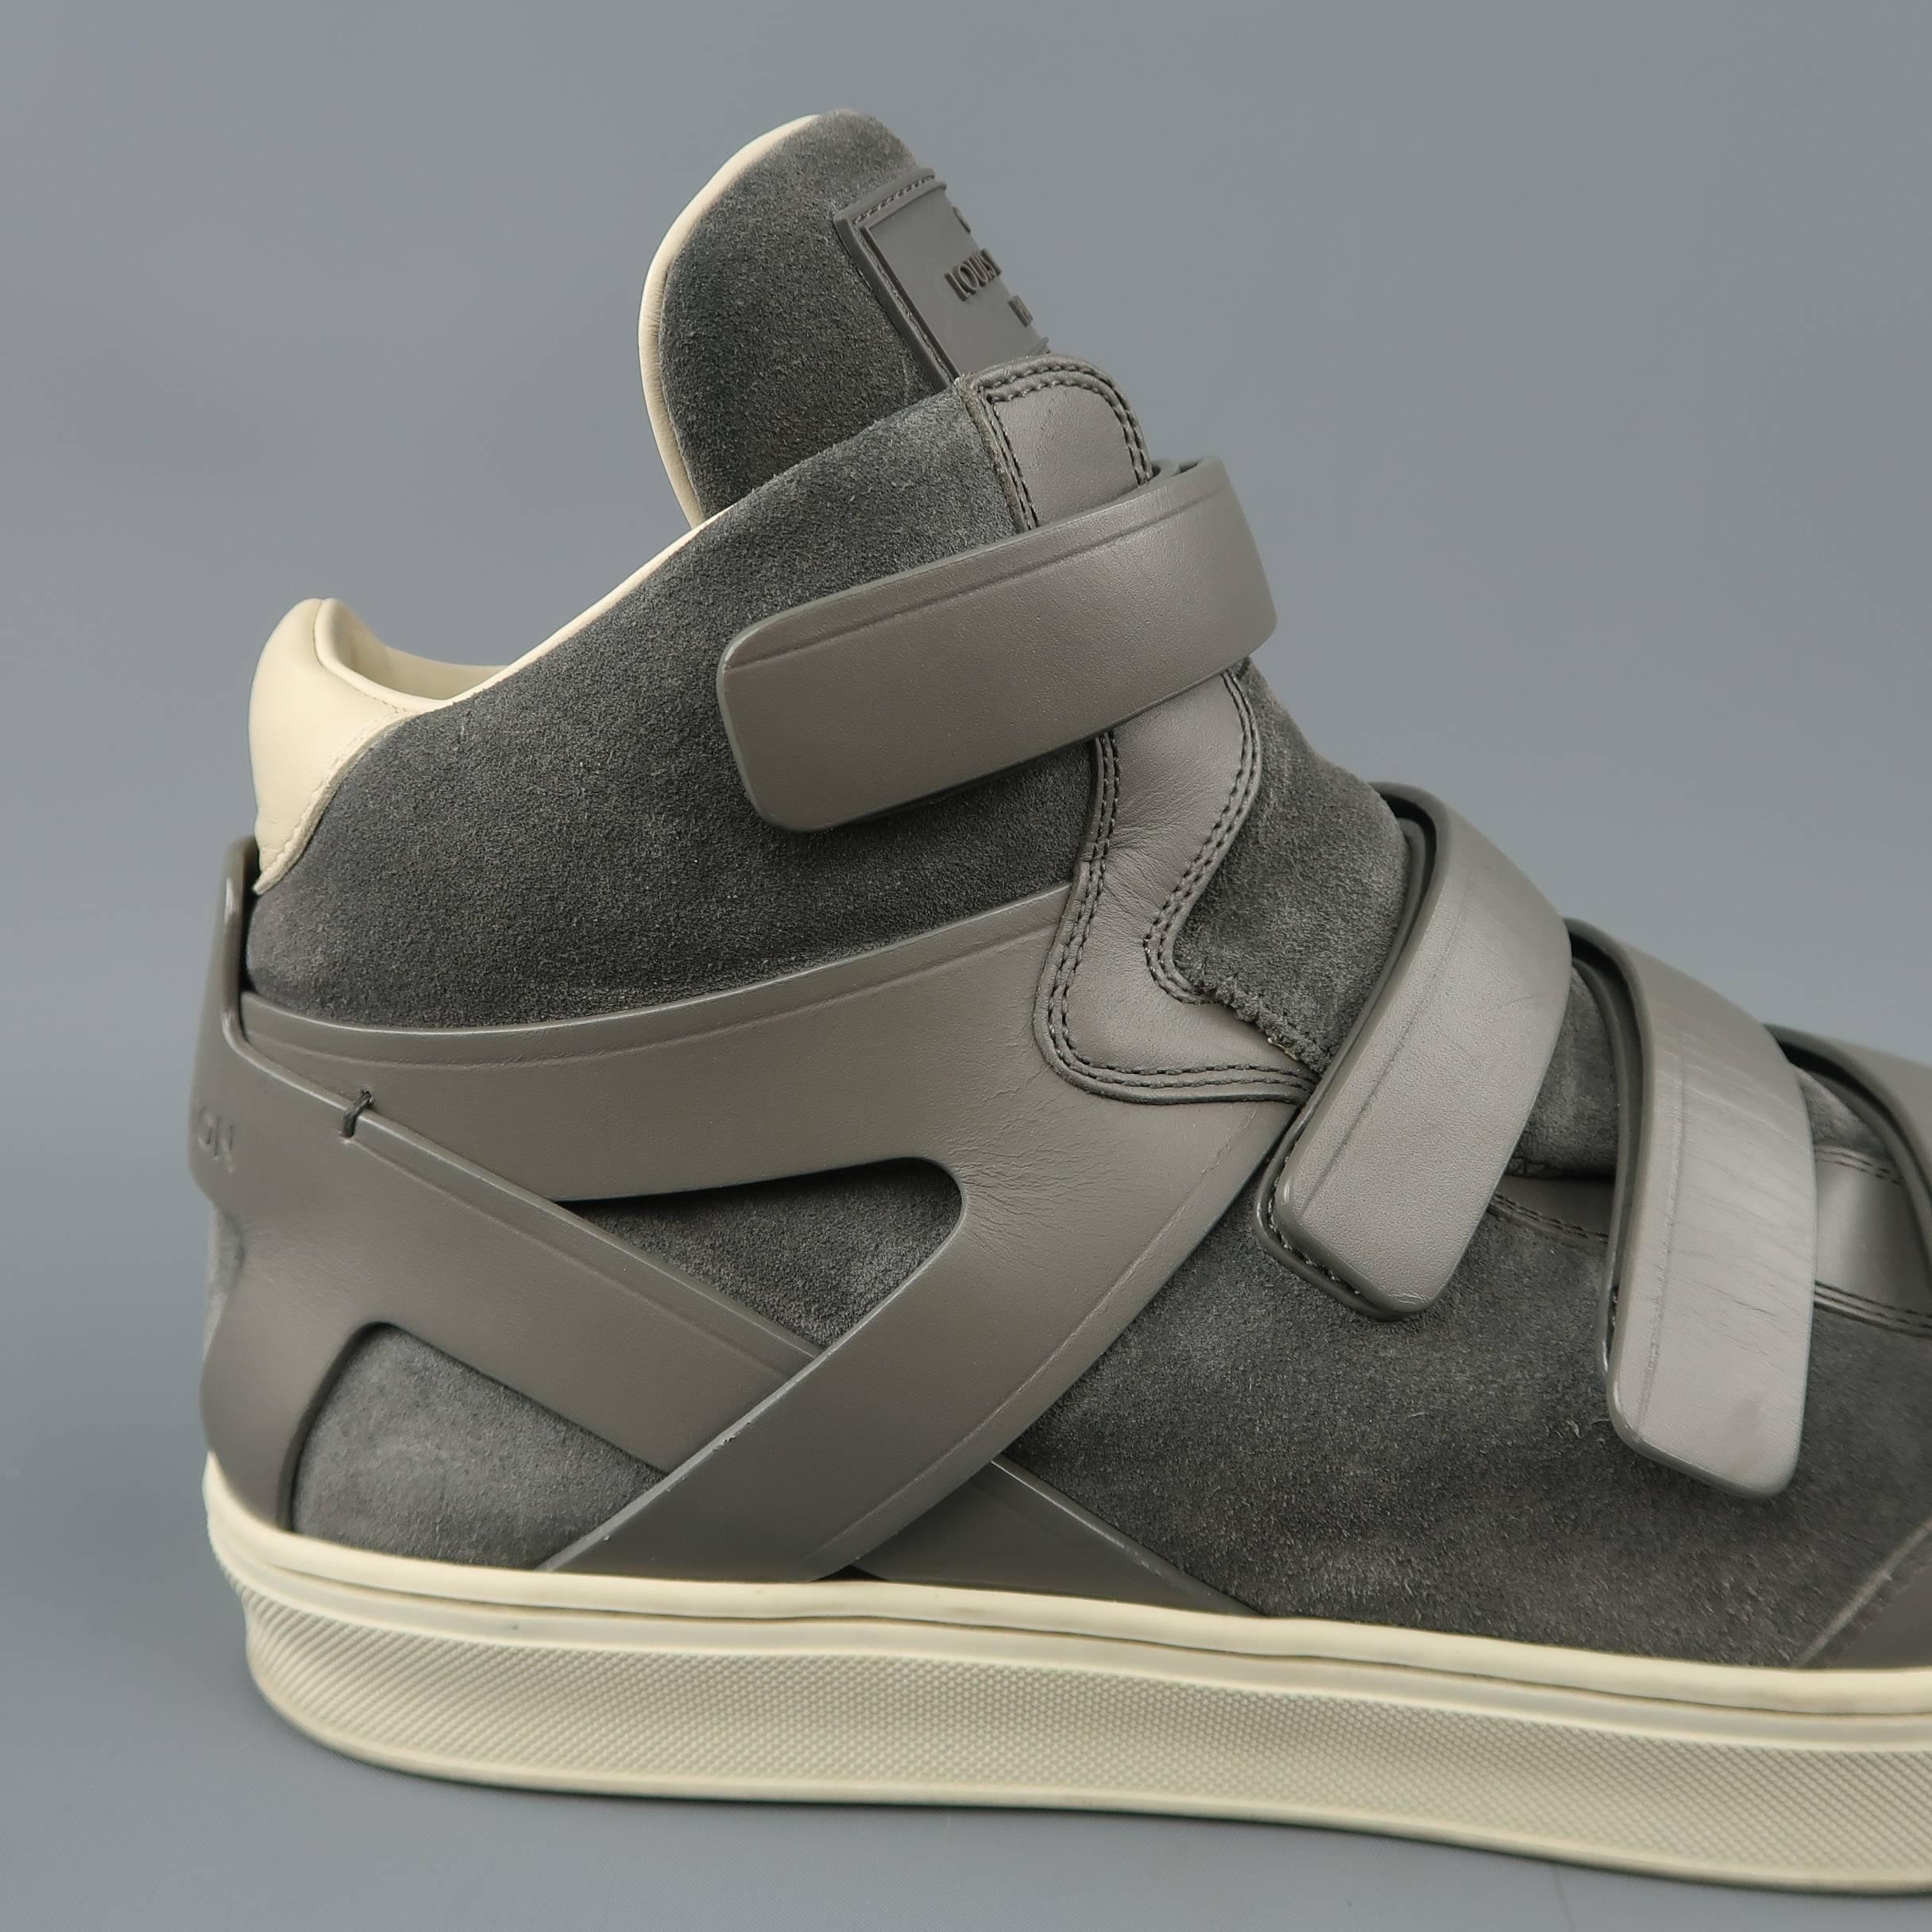 Men's LOUIS VUITTON Sneaker Size 11 Gray Leather and Suede Velcro